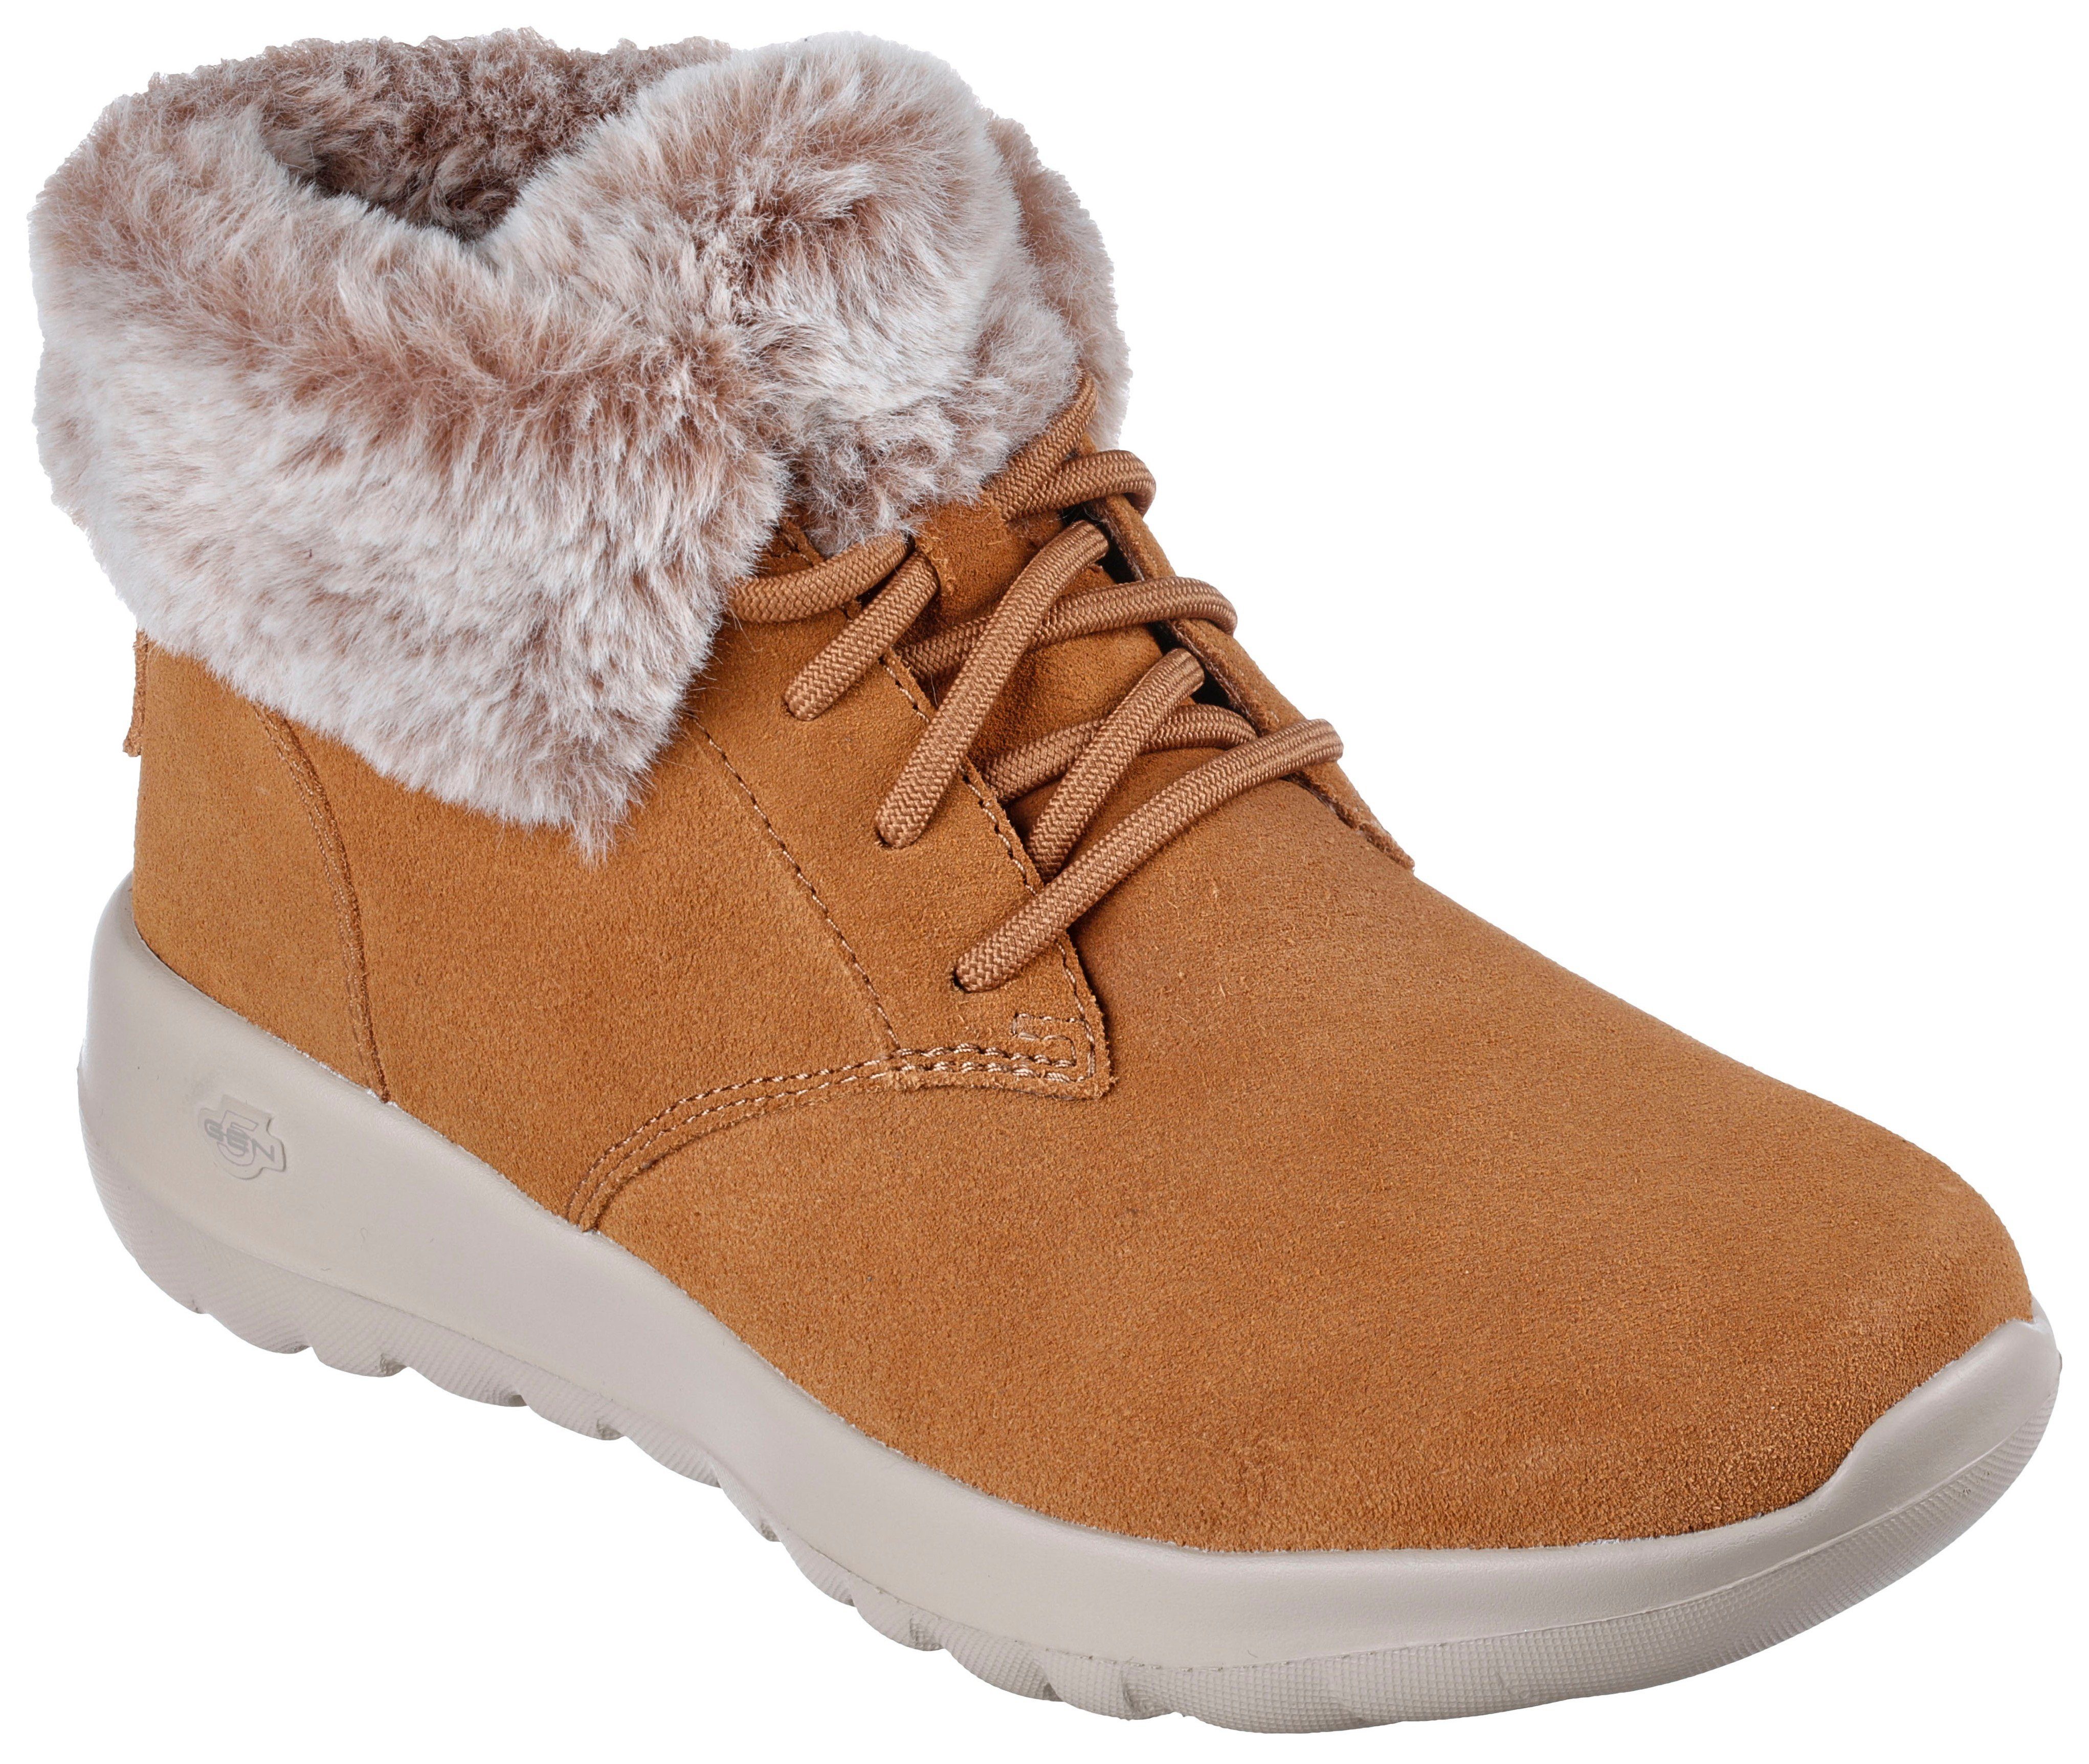 Skechers ON-THE-GO JOY - PLUSH DREAMS Winterboots mit Ortholite, Gepolstert  durch Air-Cooled Goga Mat